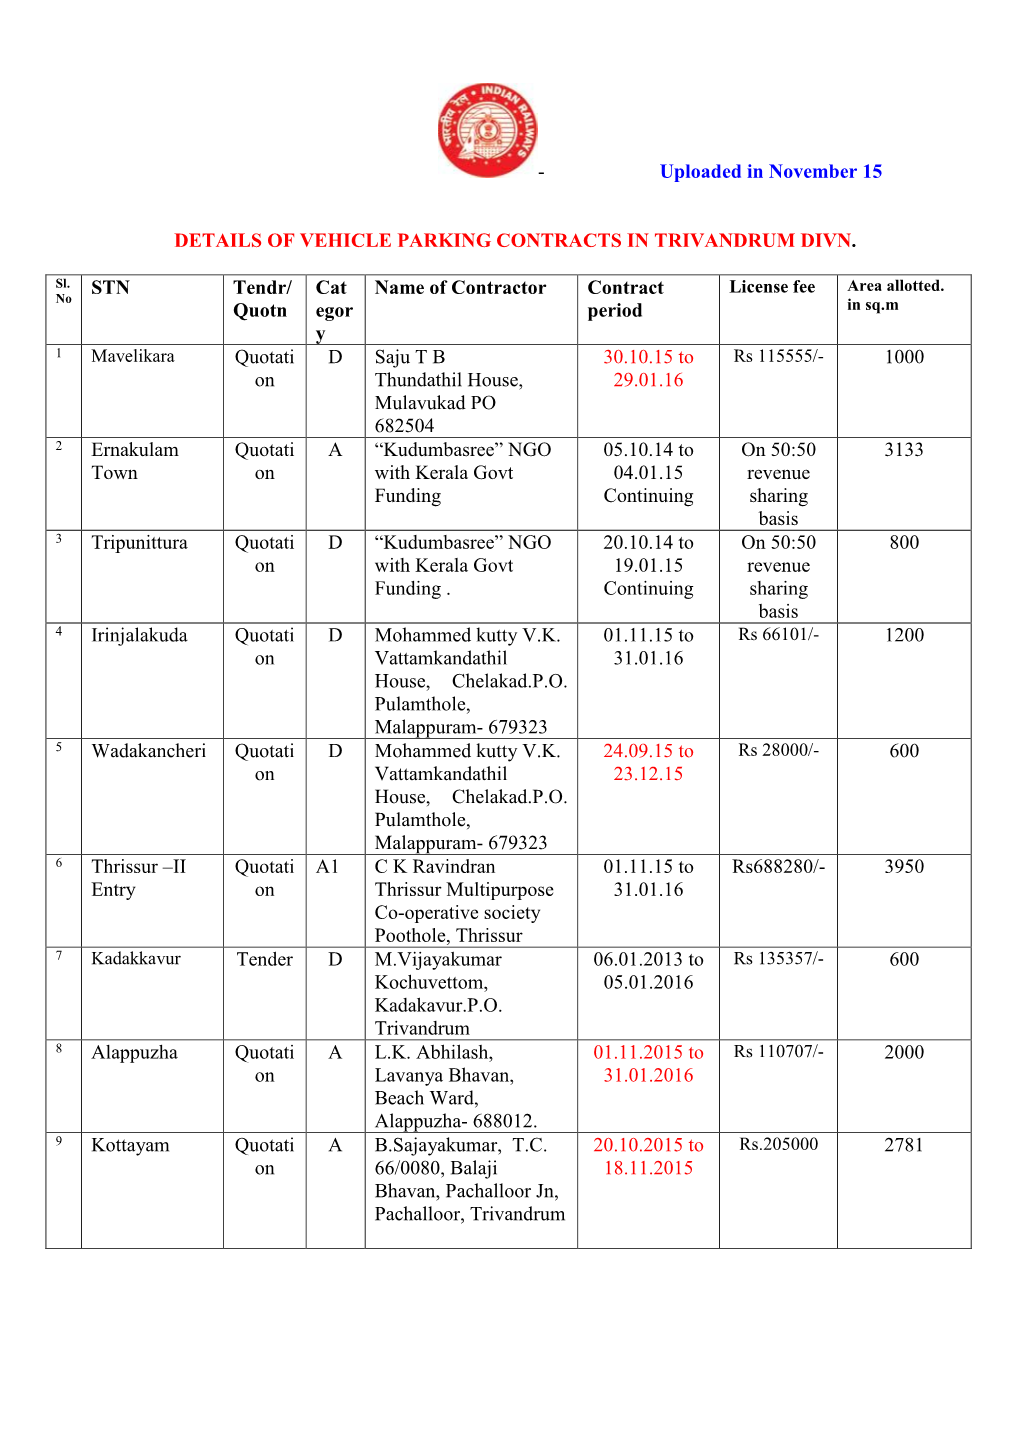 Details of Vehicle Parking Contracts in Trivandrum Divn